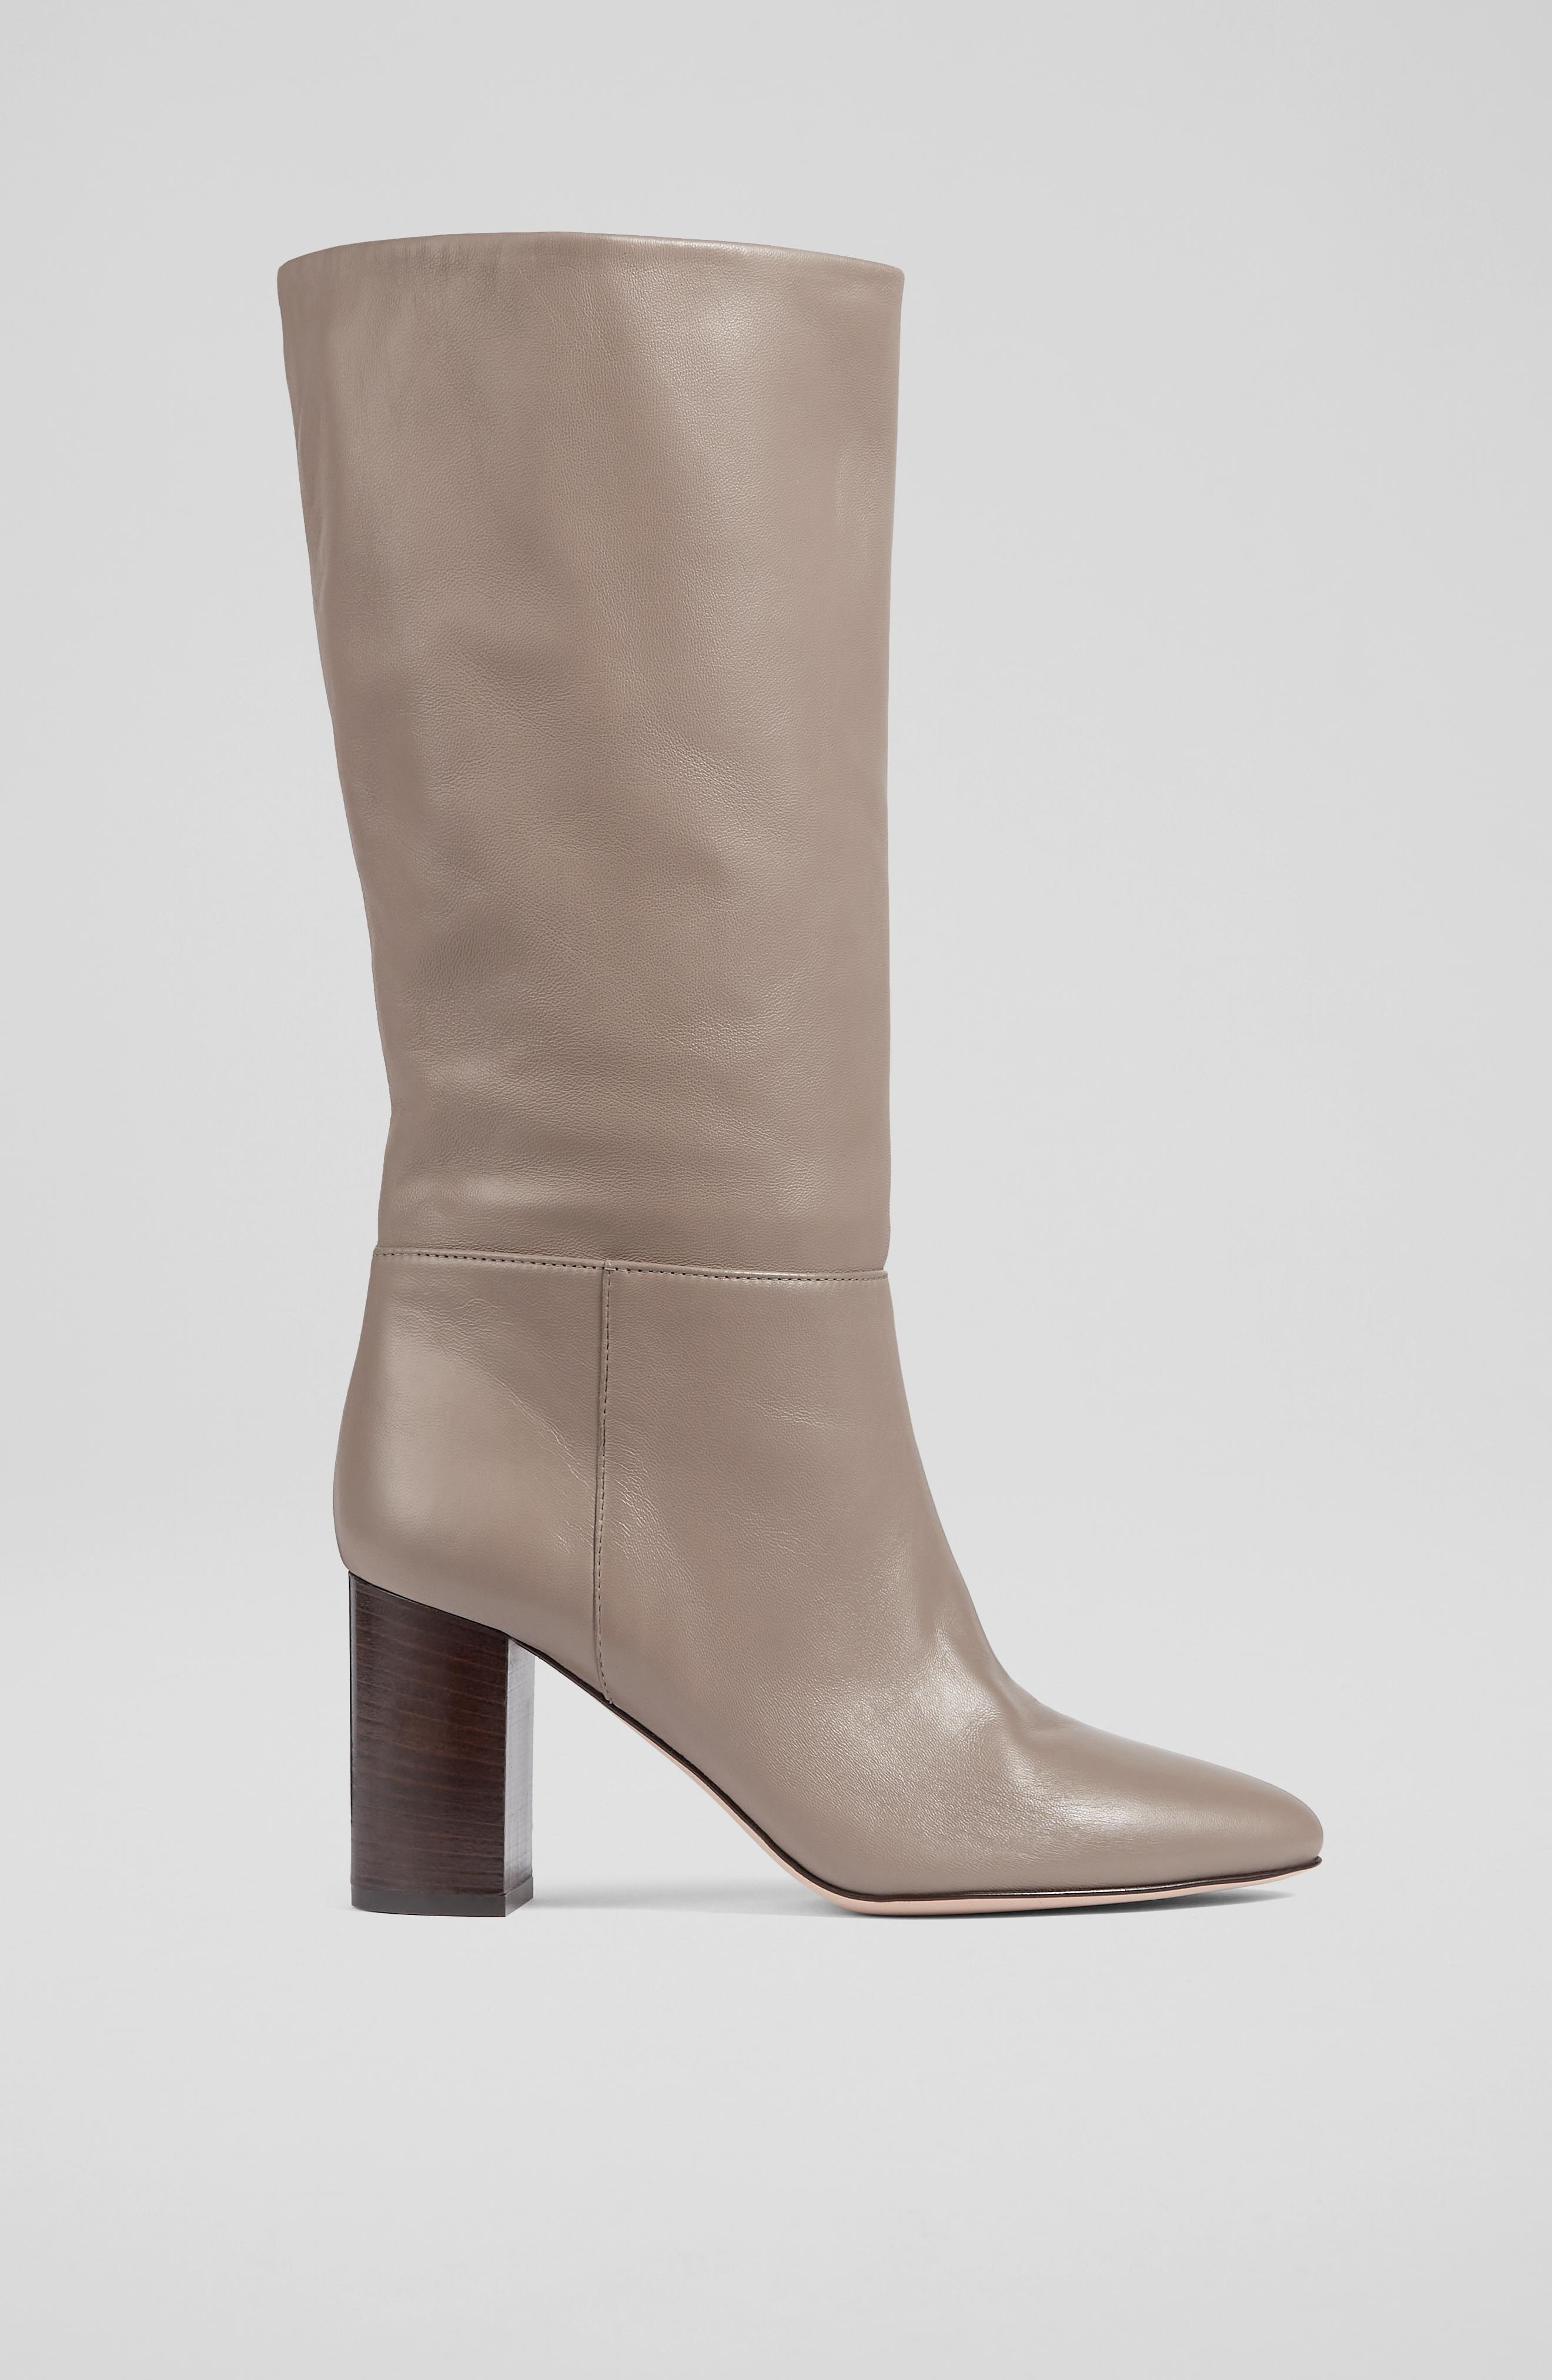 L.K.Bennett Brogan Taupe Leather Slouchy Knee Boots, Taupe